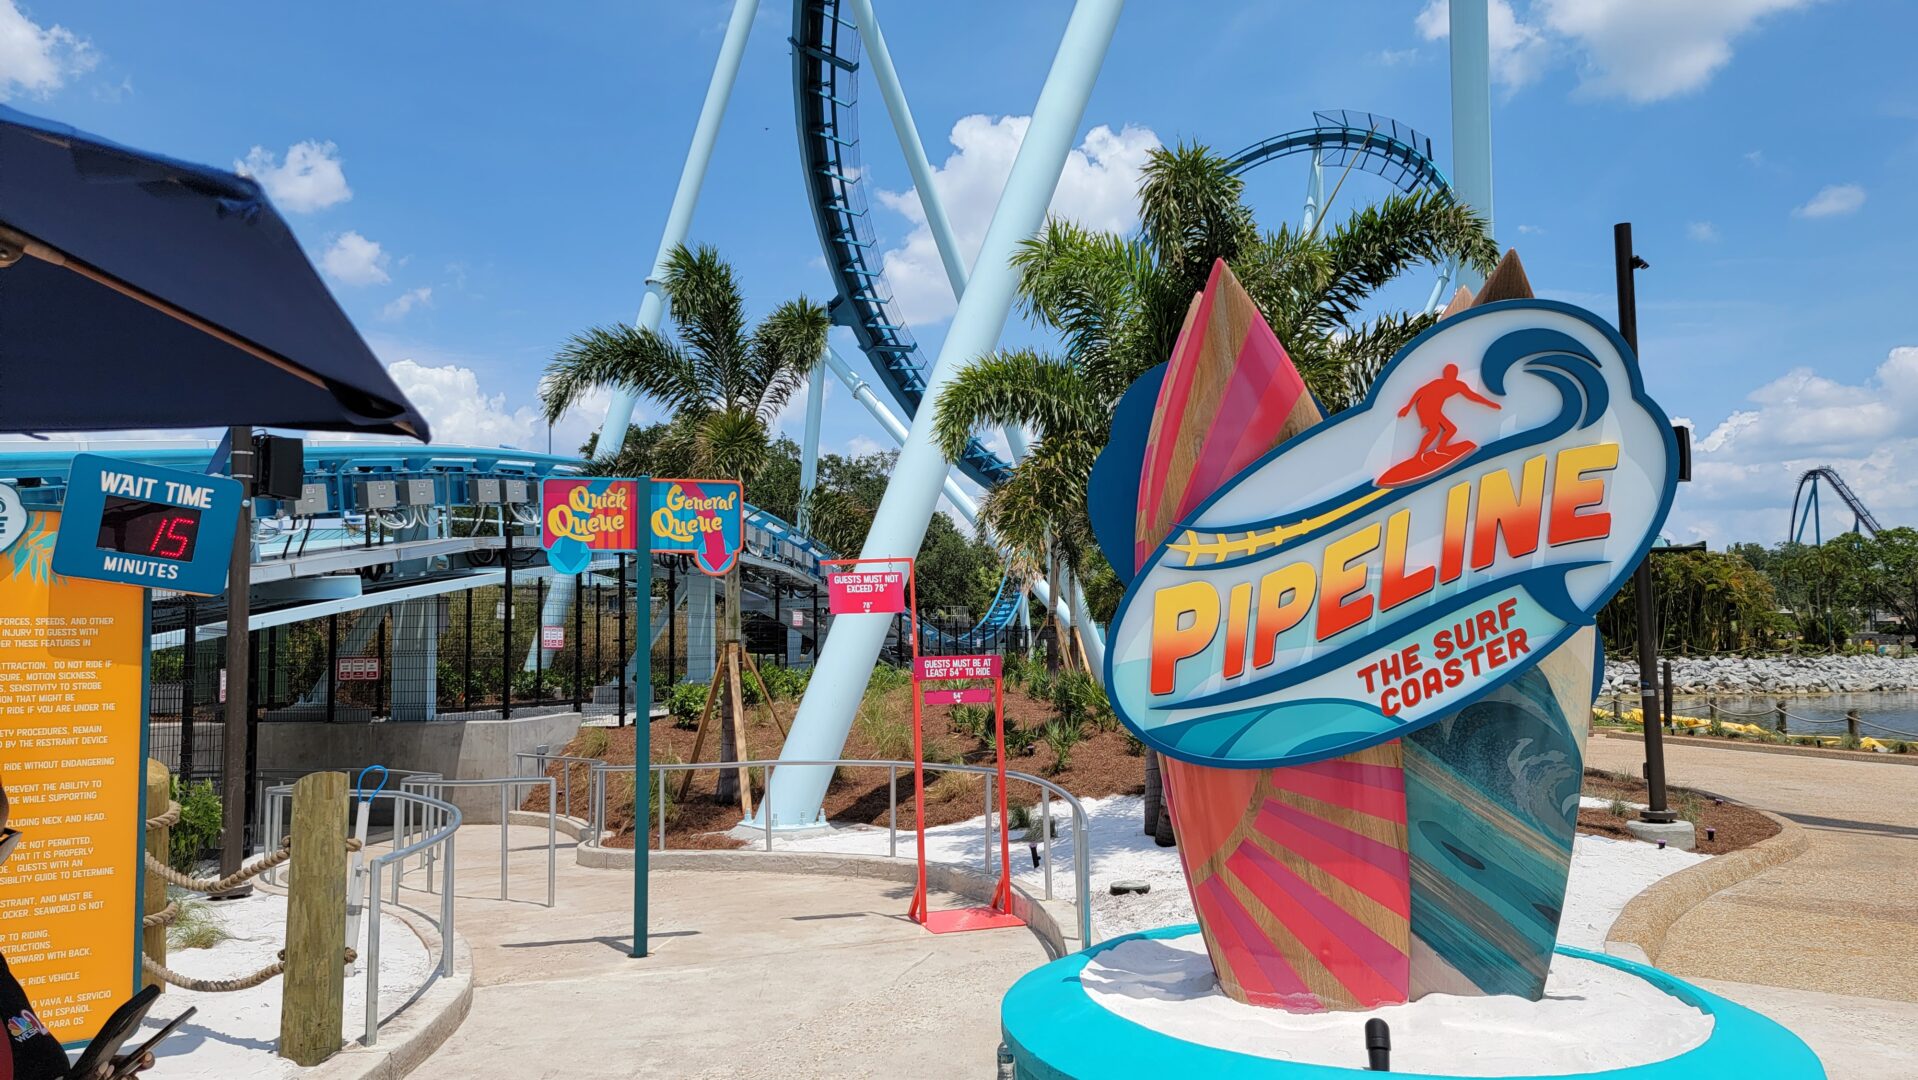 We Rode Pipeline: The Surf Coaster at SeaWorld Orlando – Our Review